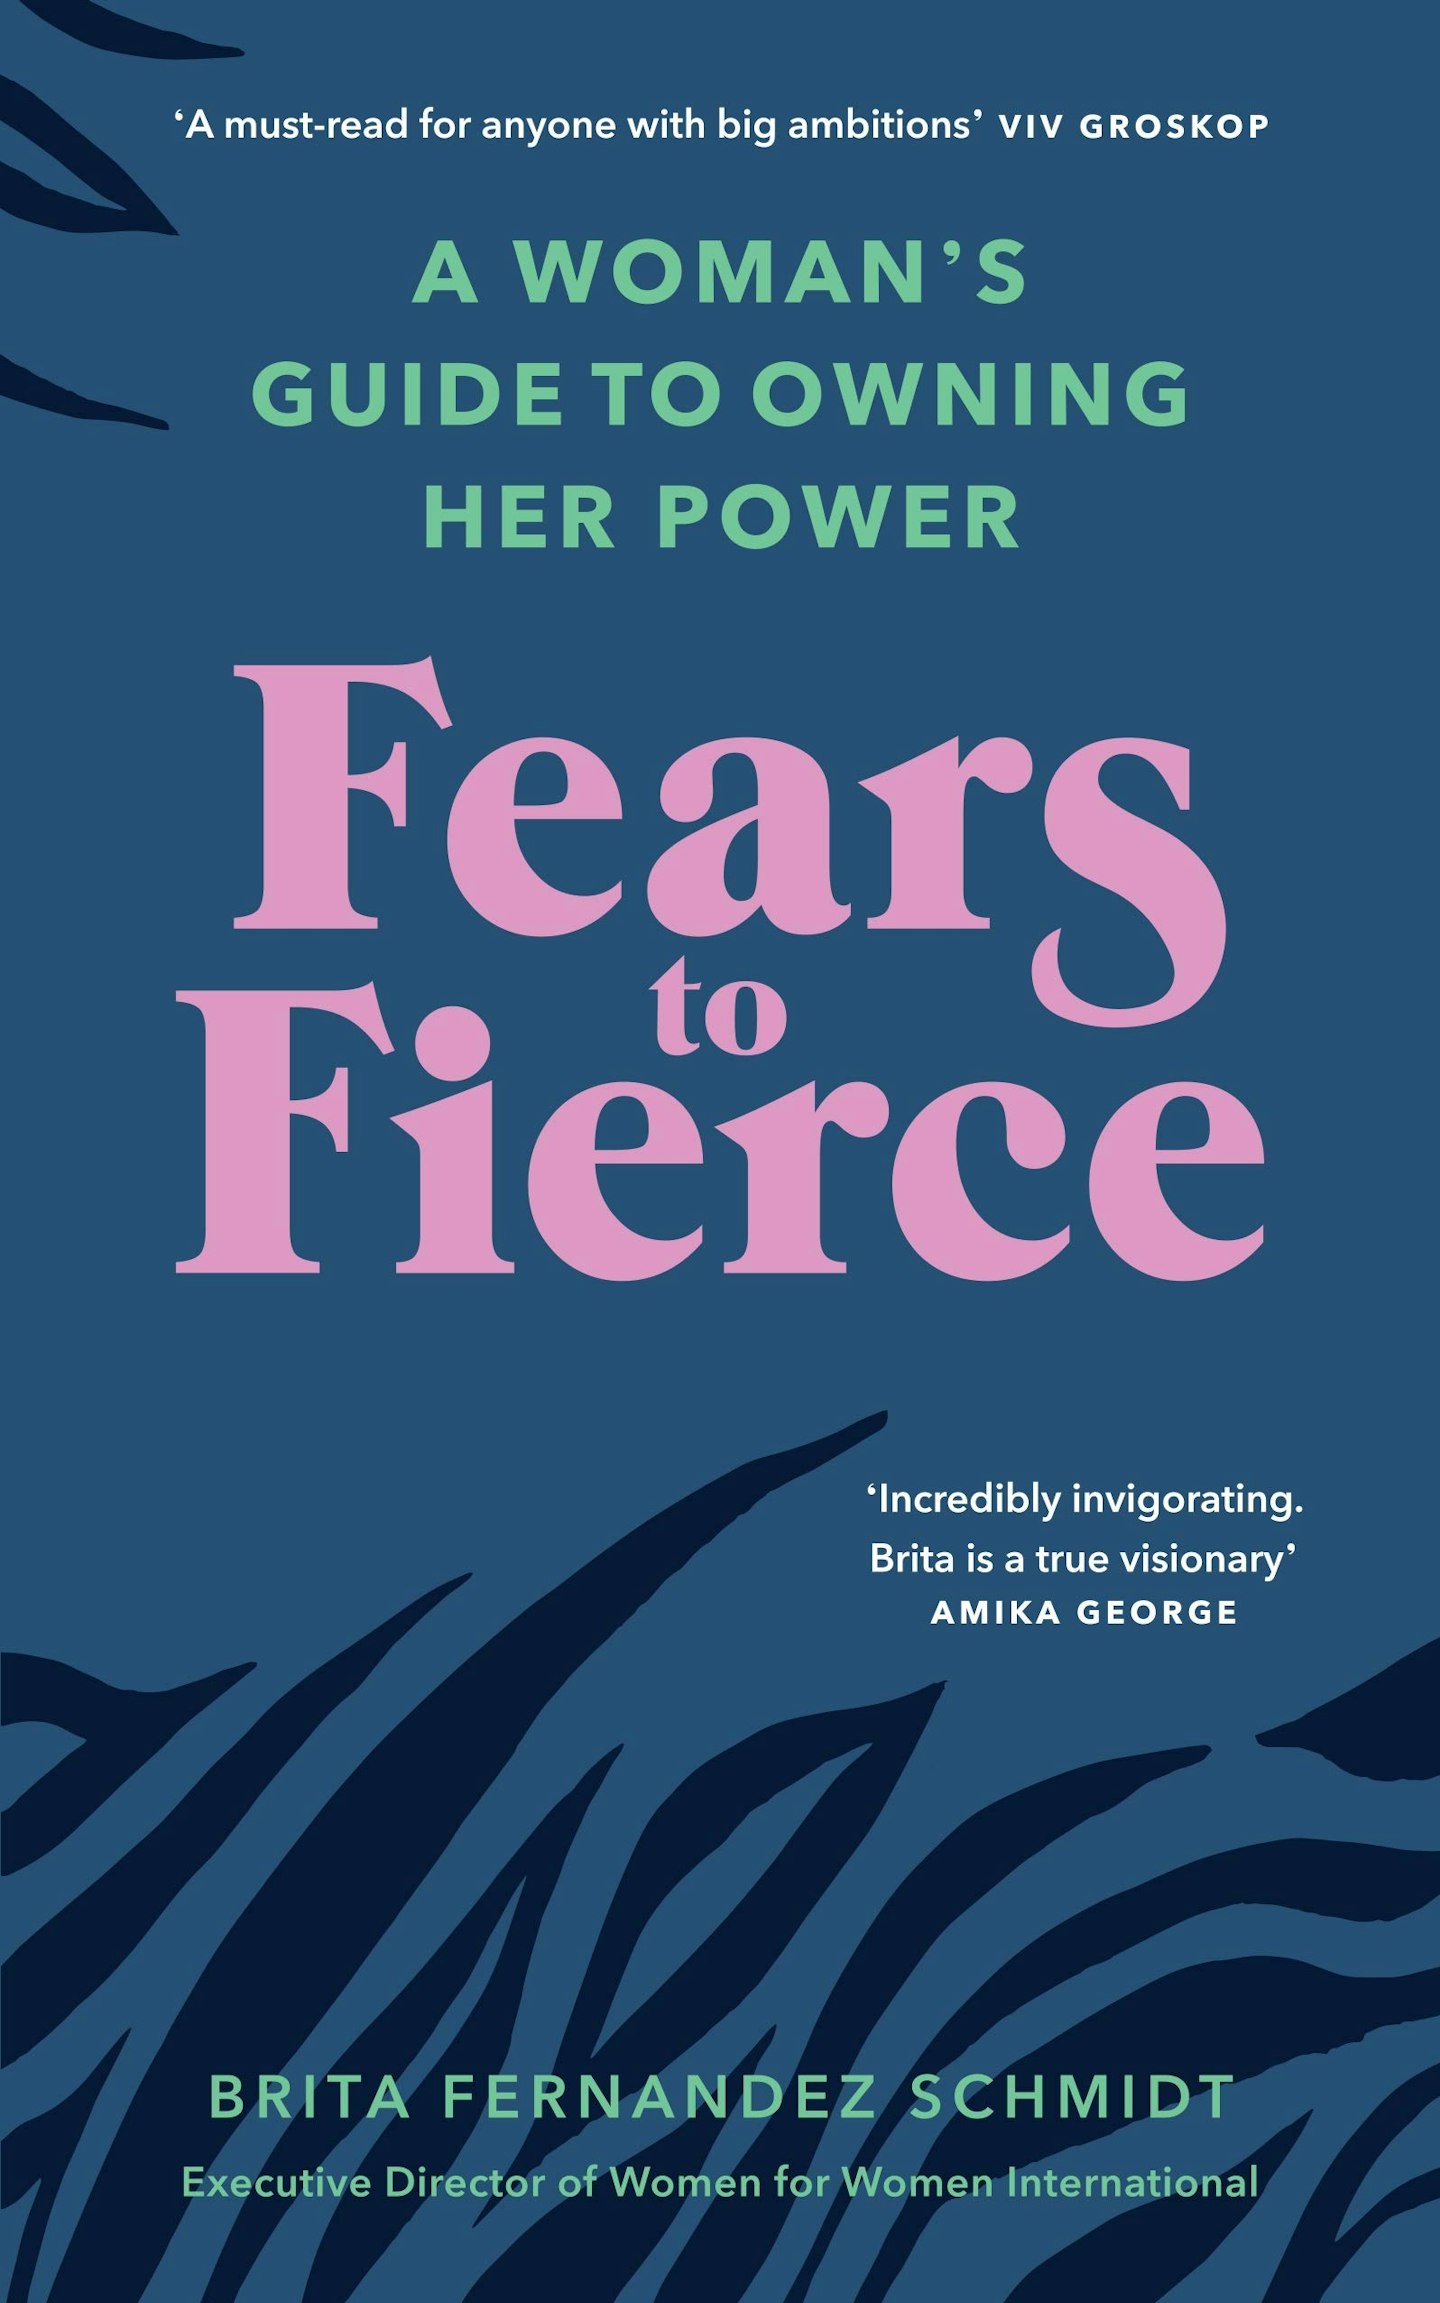 Fears to Fierce: A Woman's Guide to Owning Her Power, by Brita Fernandez Schmidt